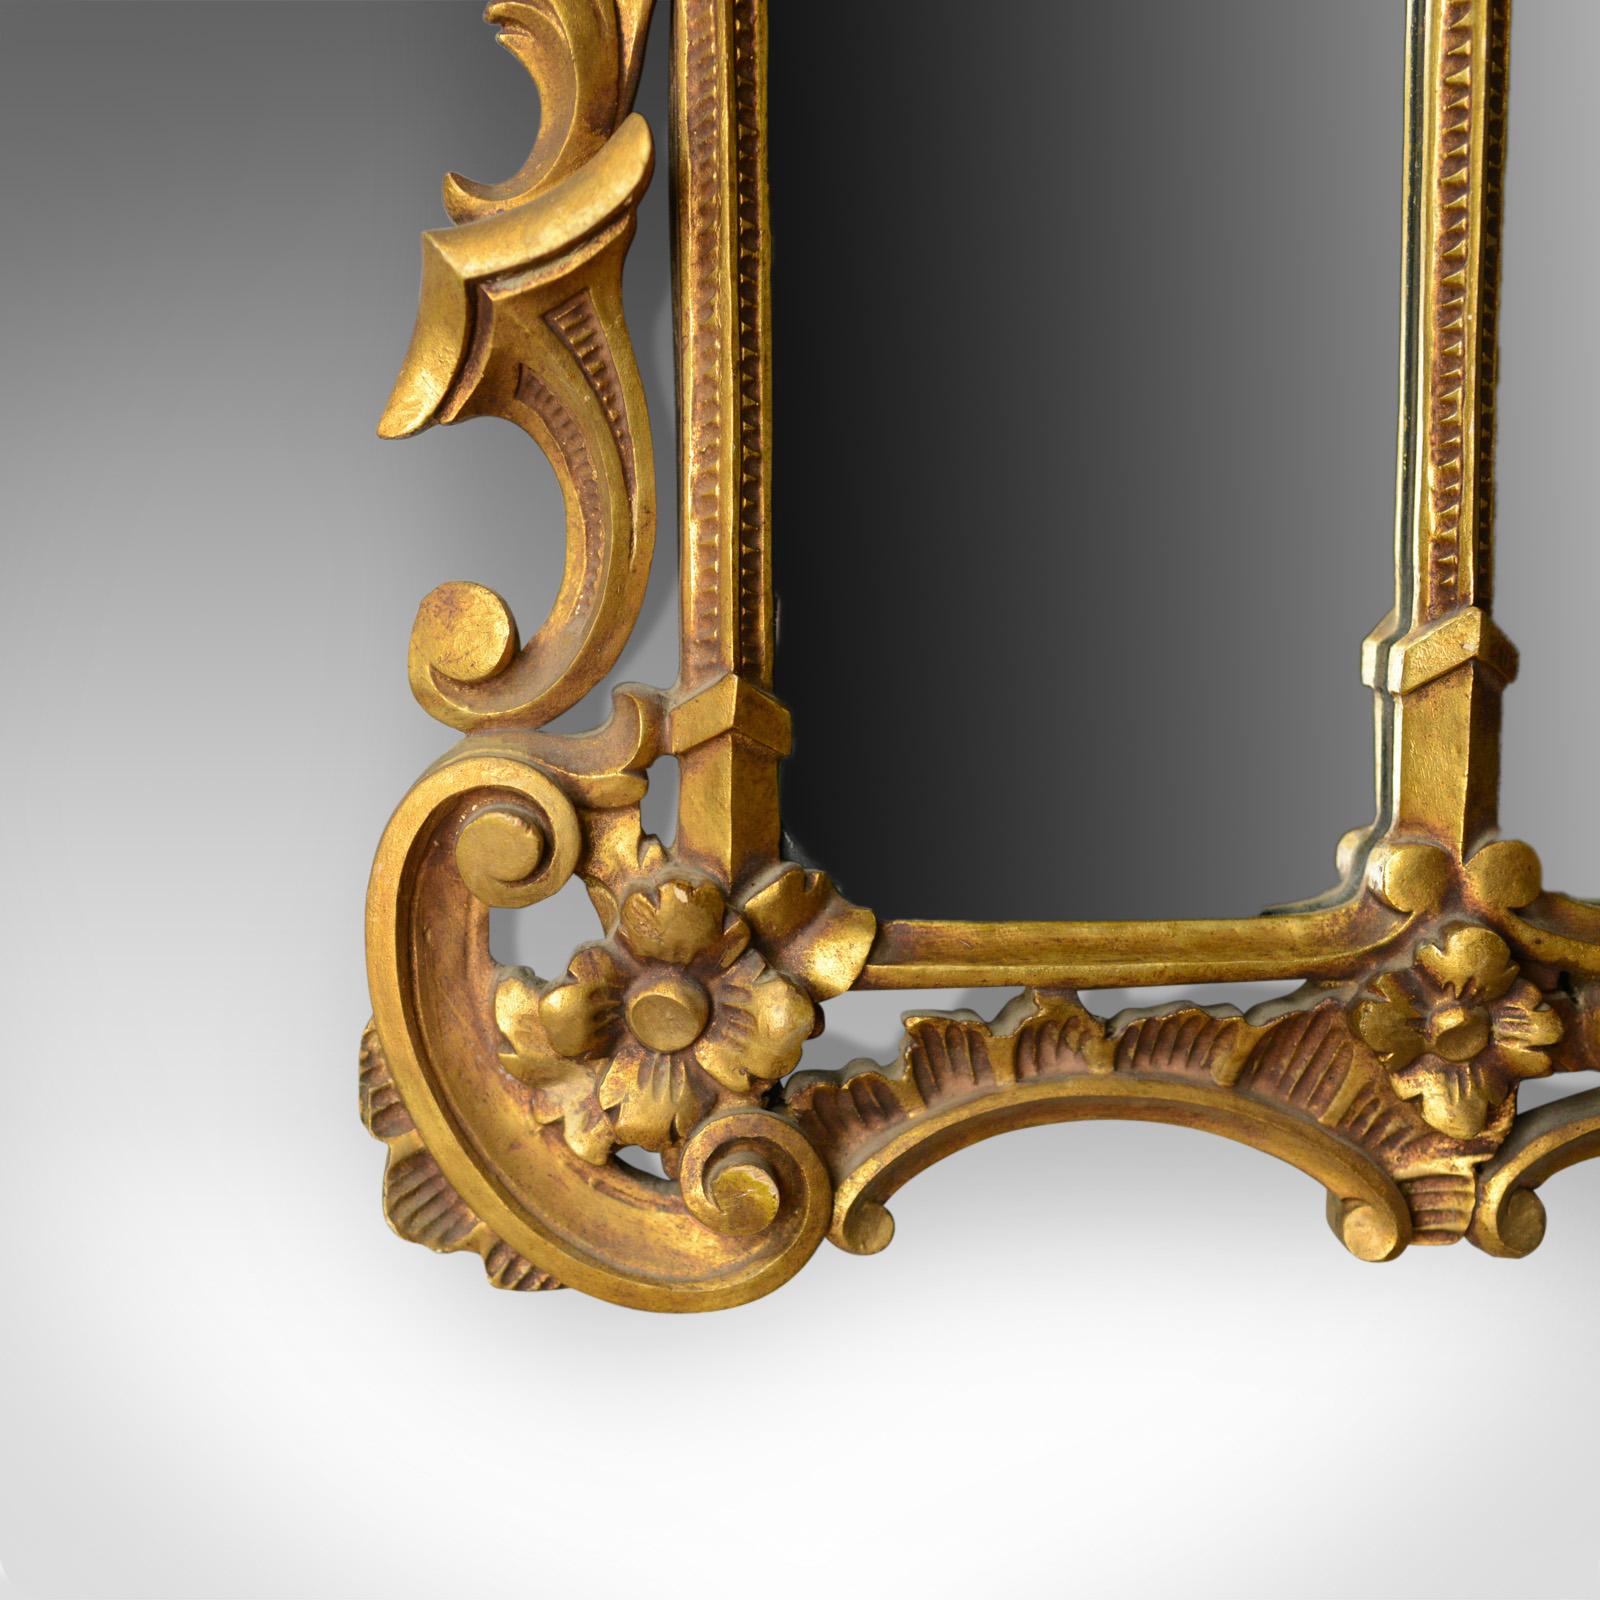 Antique Overmantel Mirror, English, Regency Revival, Giltwood, Triptych c.1900 1